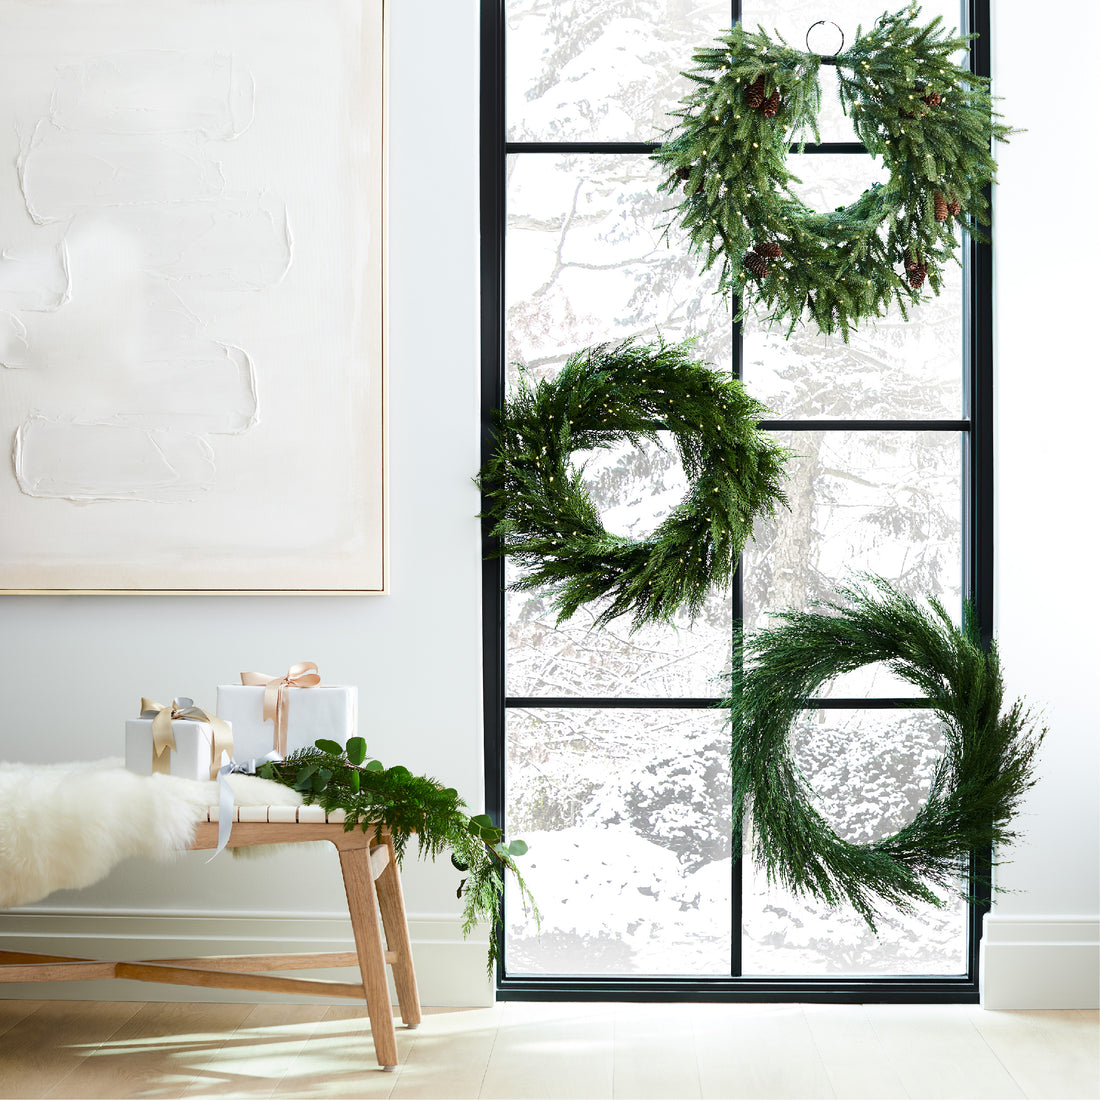 10 Christmas Wreath Decorating Ideas: Our Fave Tips for Every Room